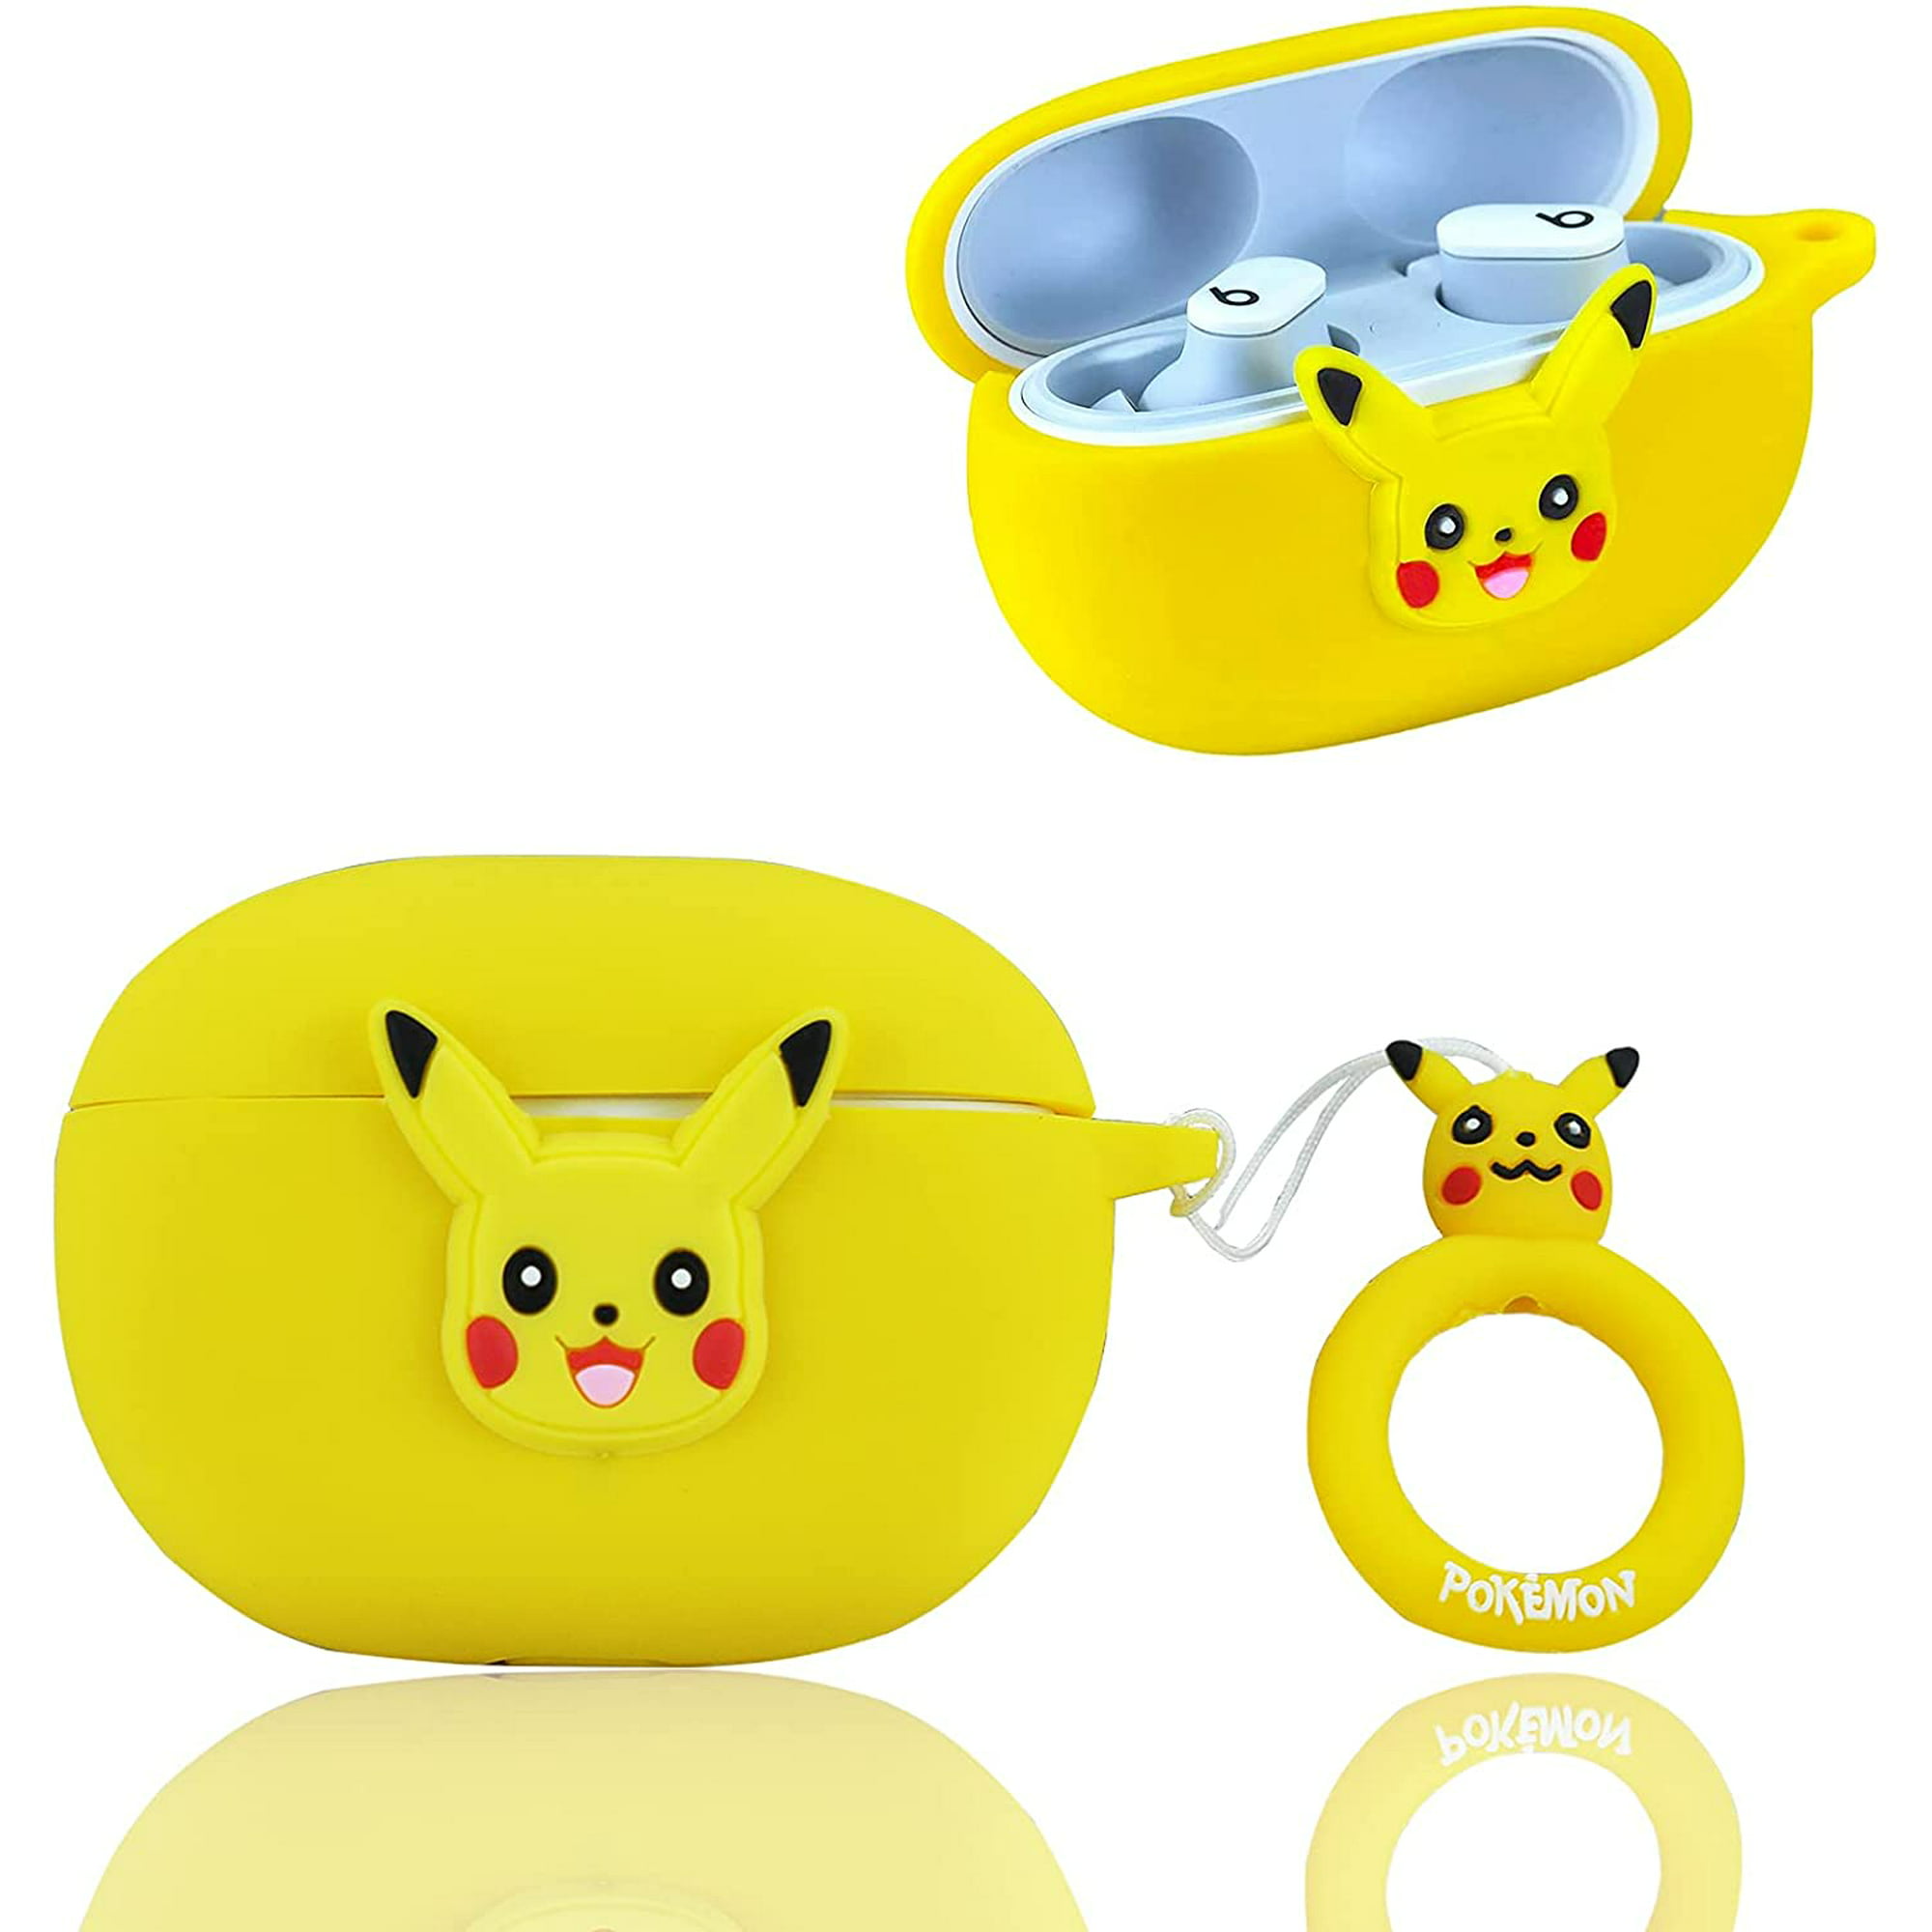 For Beats studio buds 3D Cute Cartoon Soft Silicone Shockproof